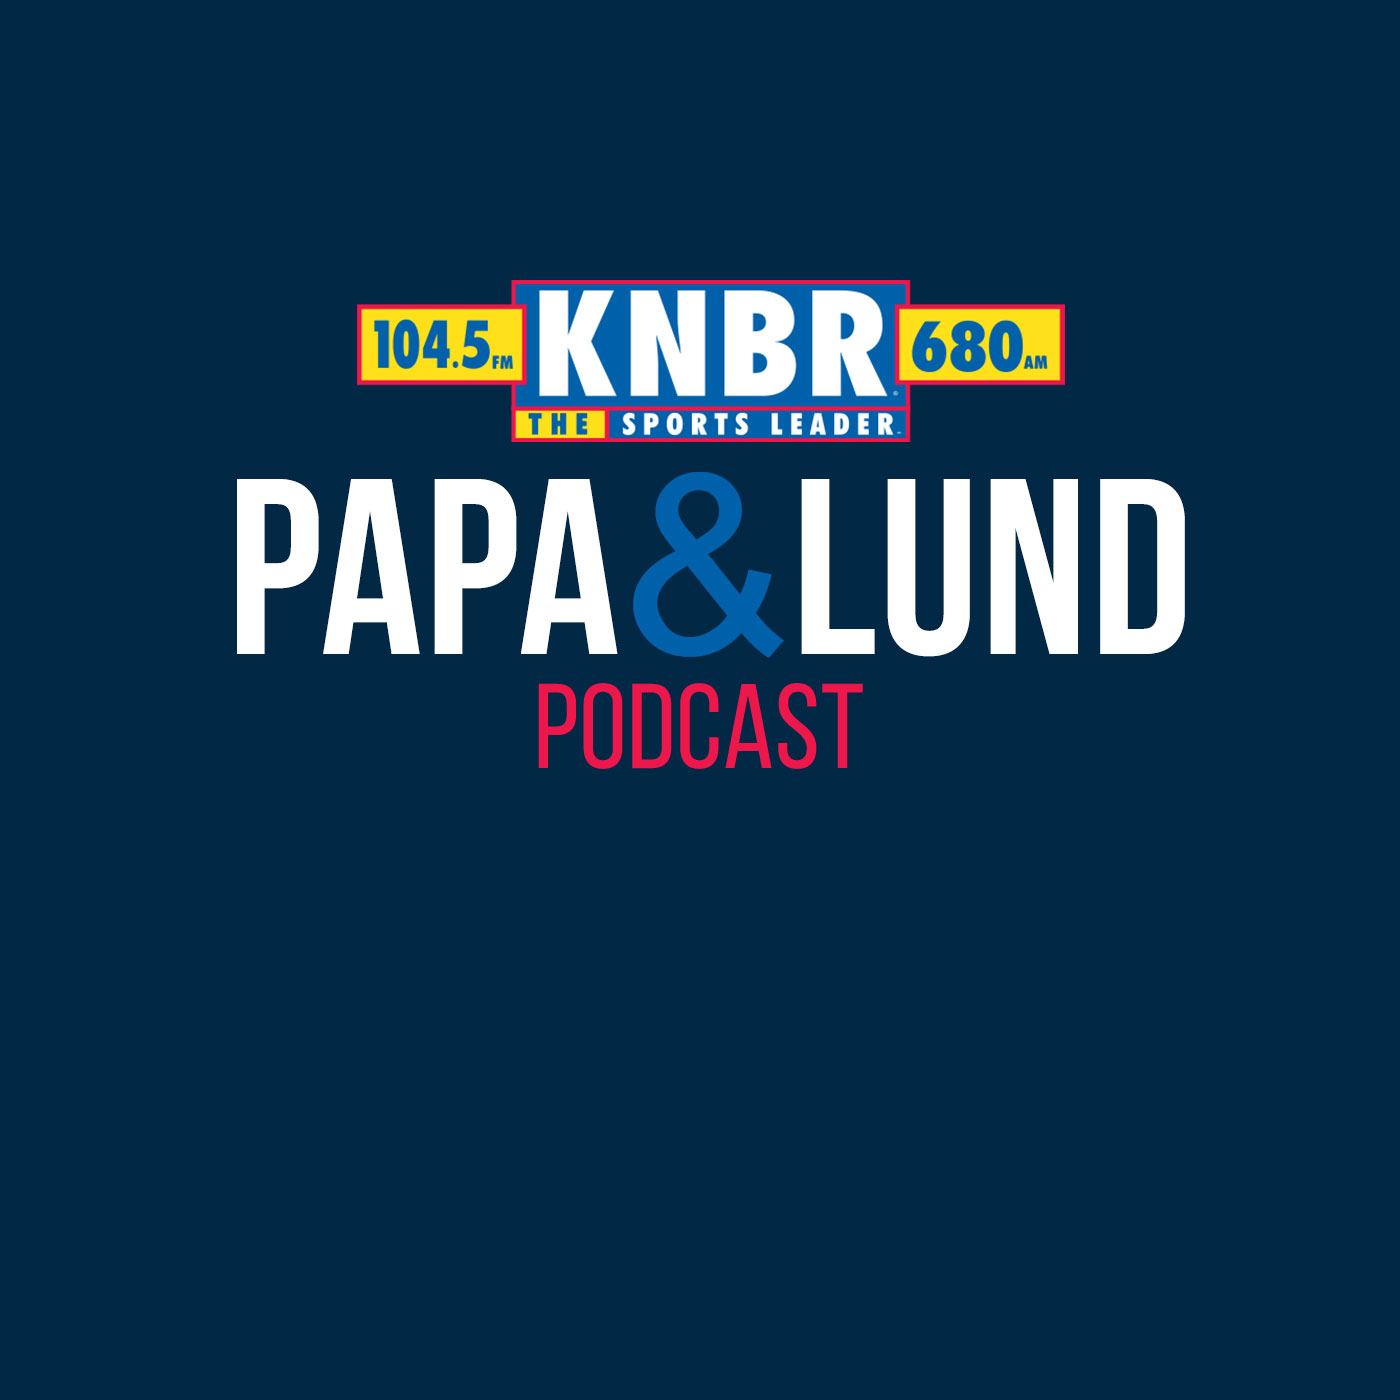 11-7 Andy Mc Cullough joins Papa & Lund to break down the results from the World Series, a small peak into the upcoming Free Agent market and provides his thoughts on where Aaron Judge may end up this off-season